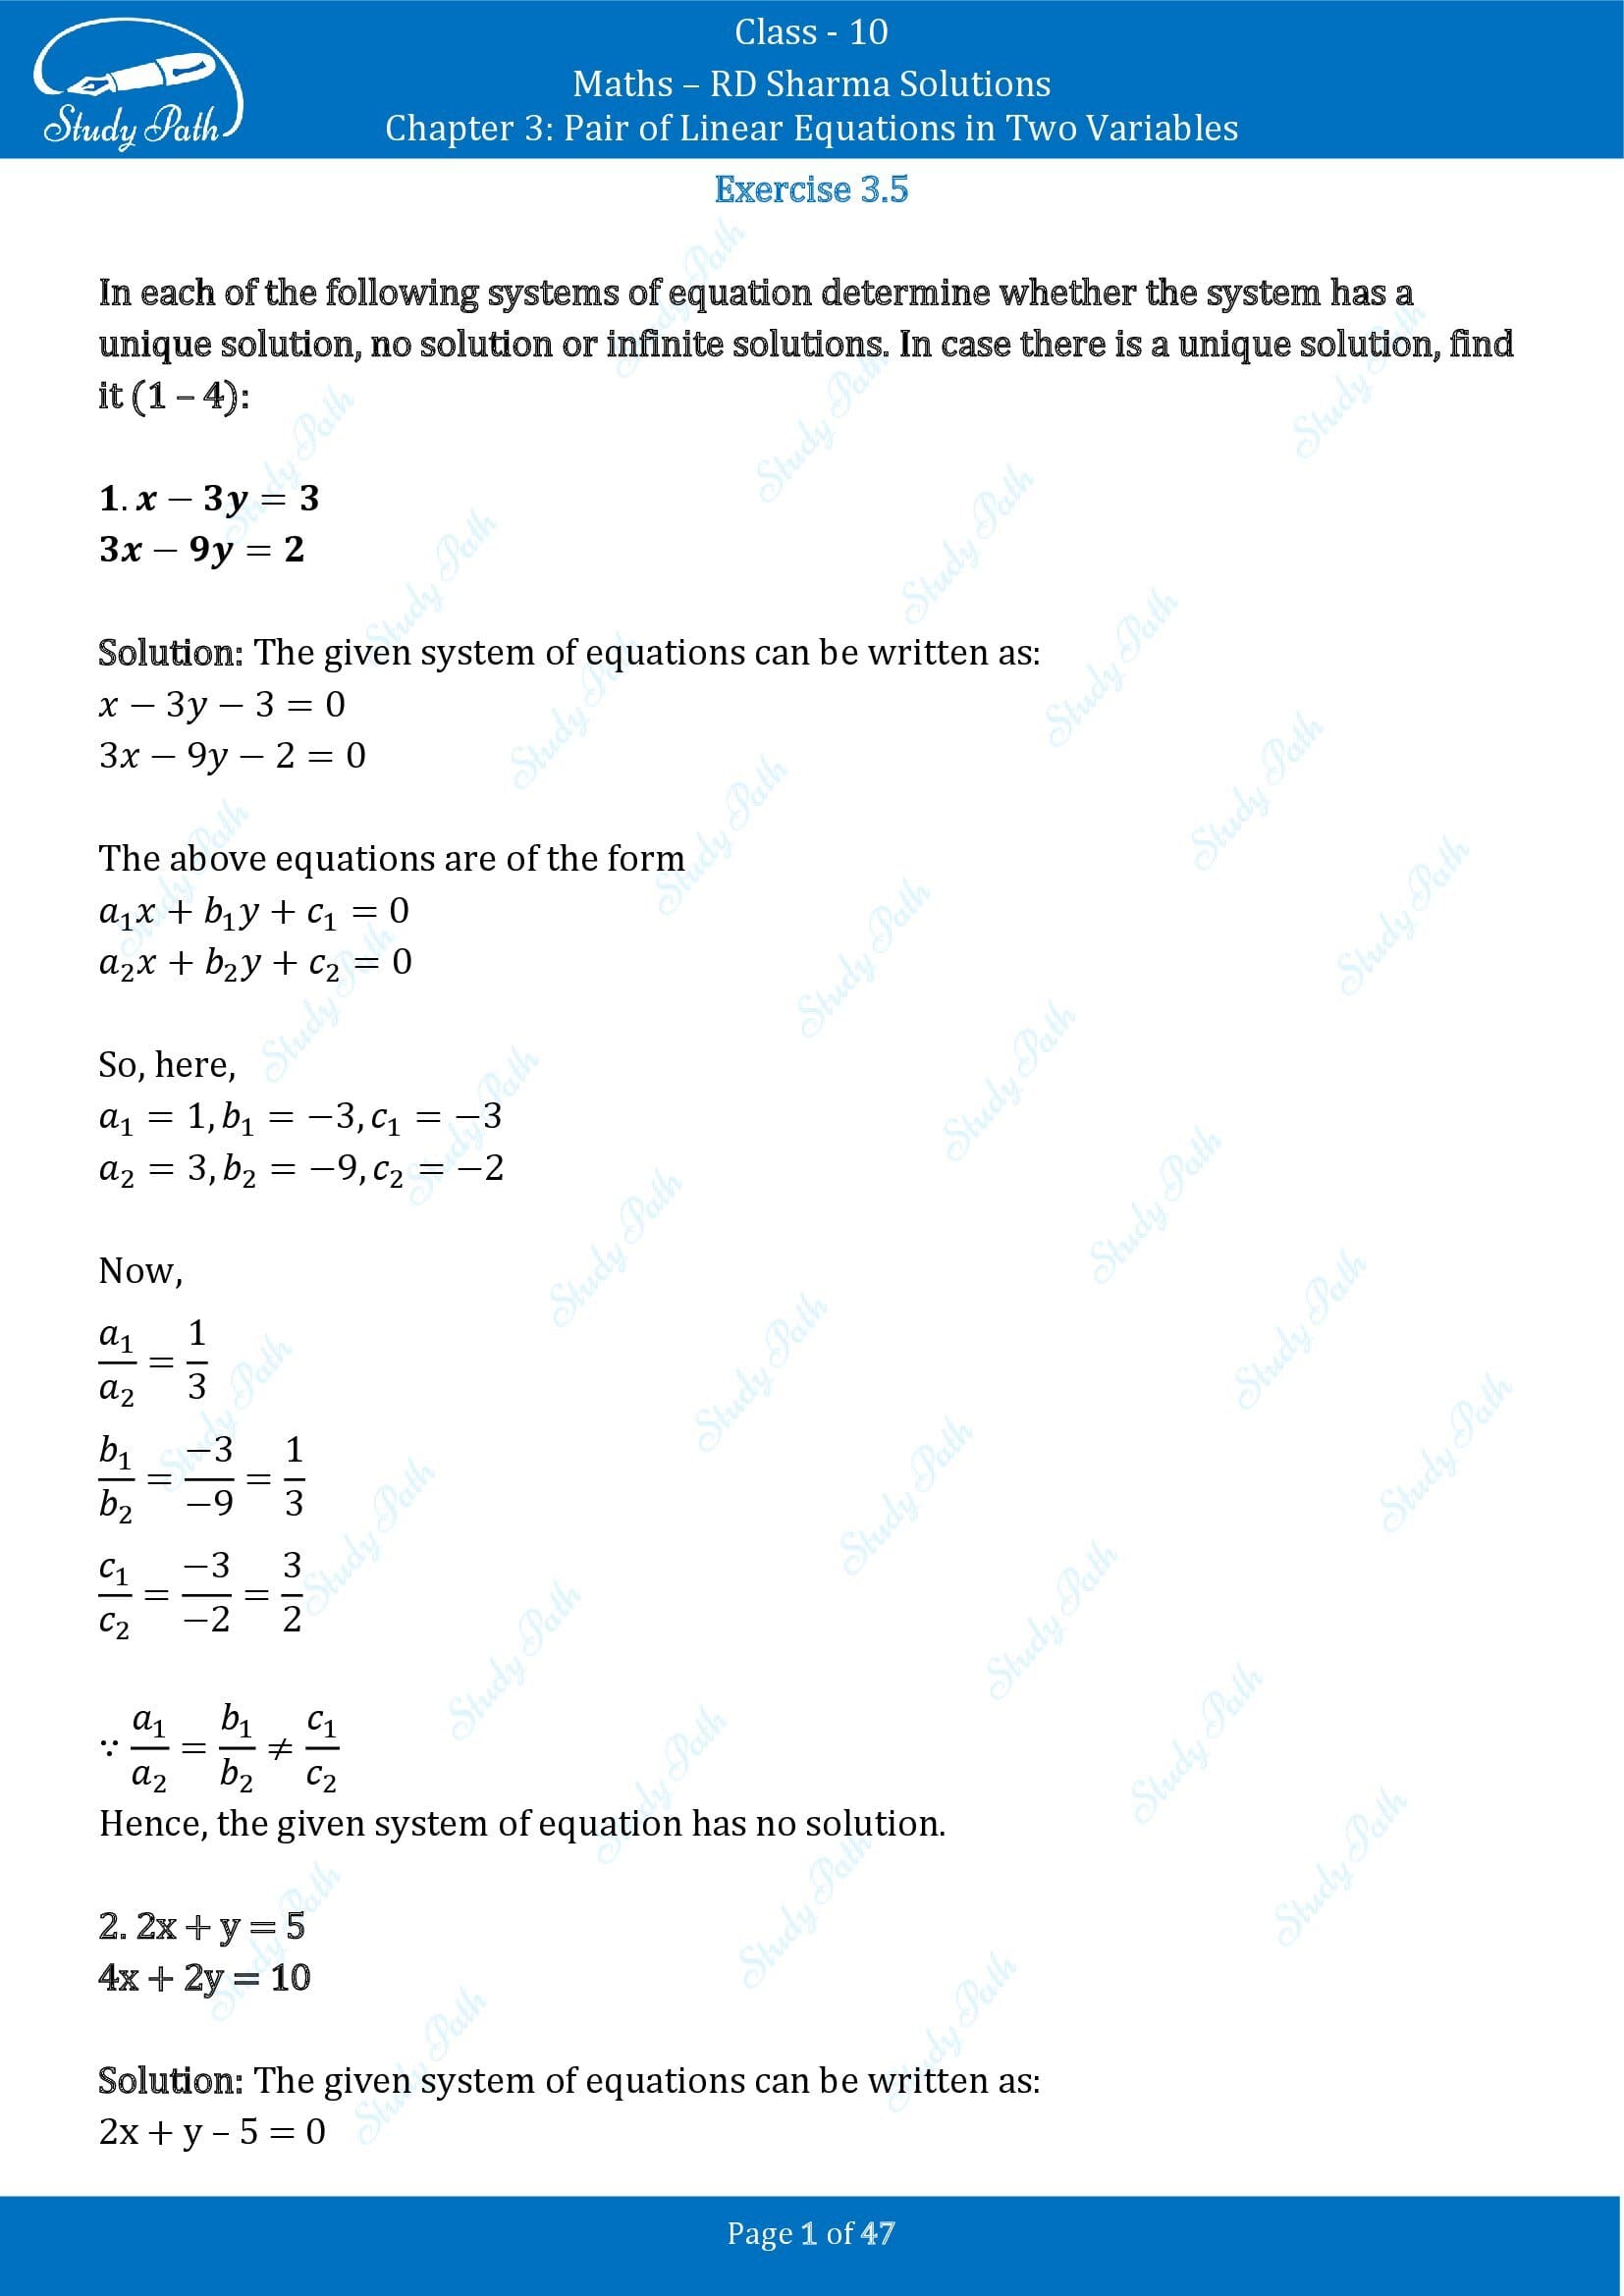 RD Sharma Solutions Class 10 Chapter 3 Pair of Linear Equations in Two Variables Exercise 3.5 00001